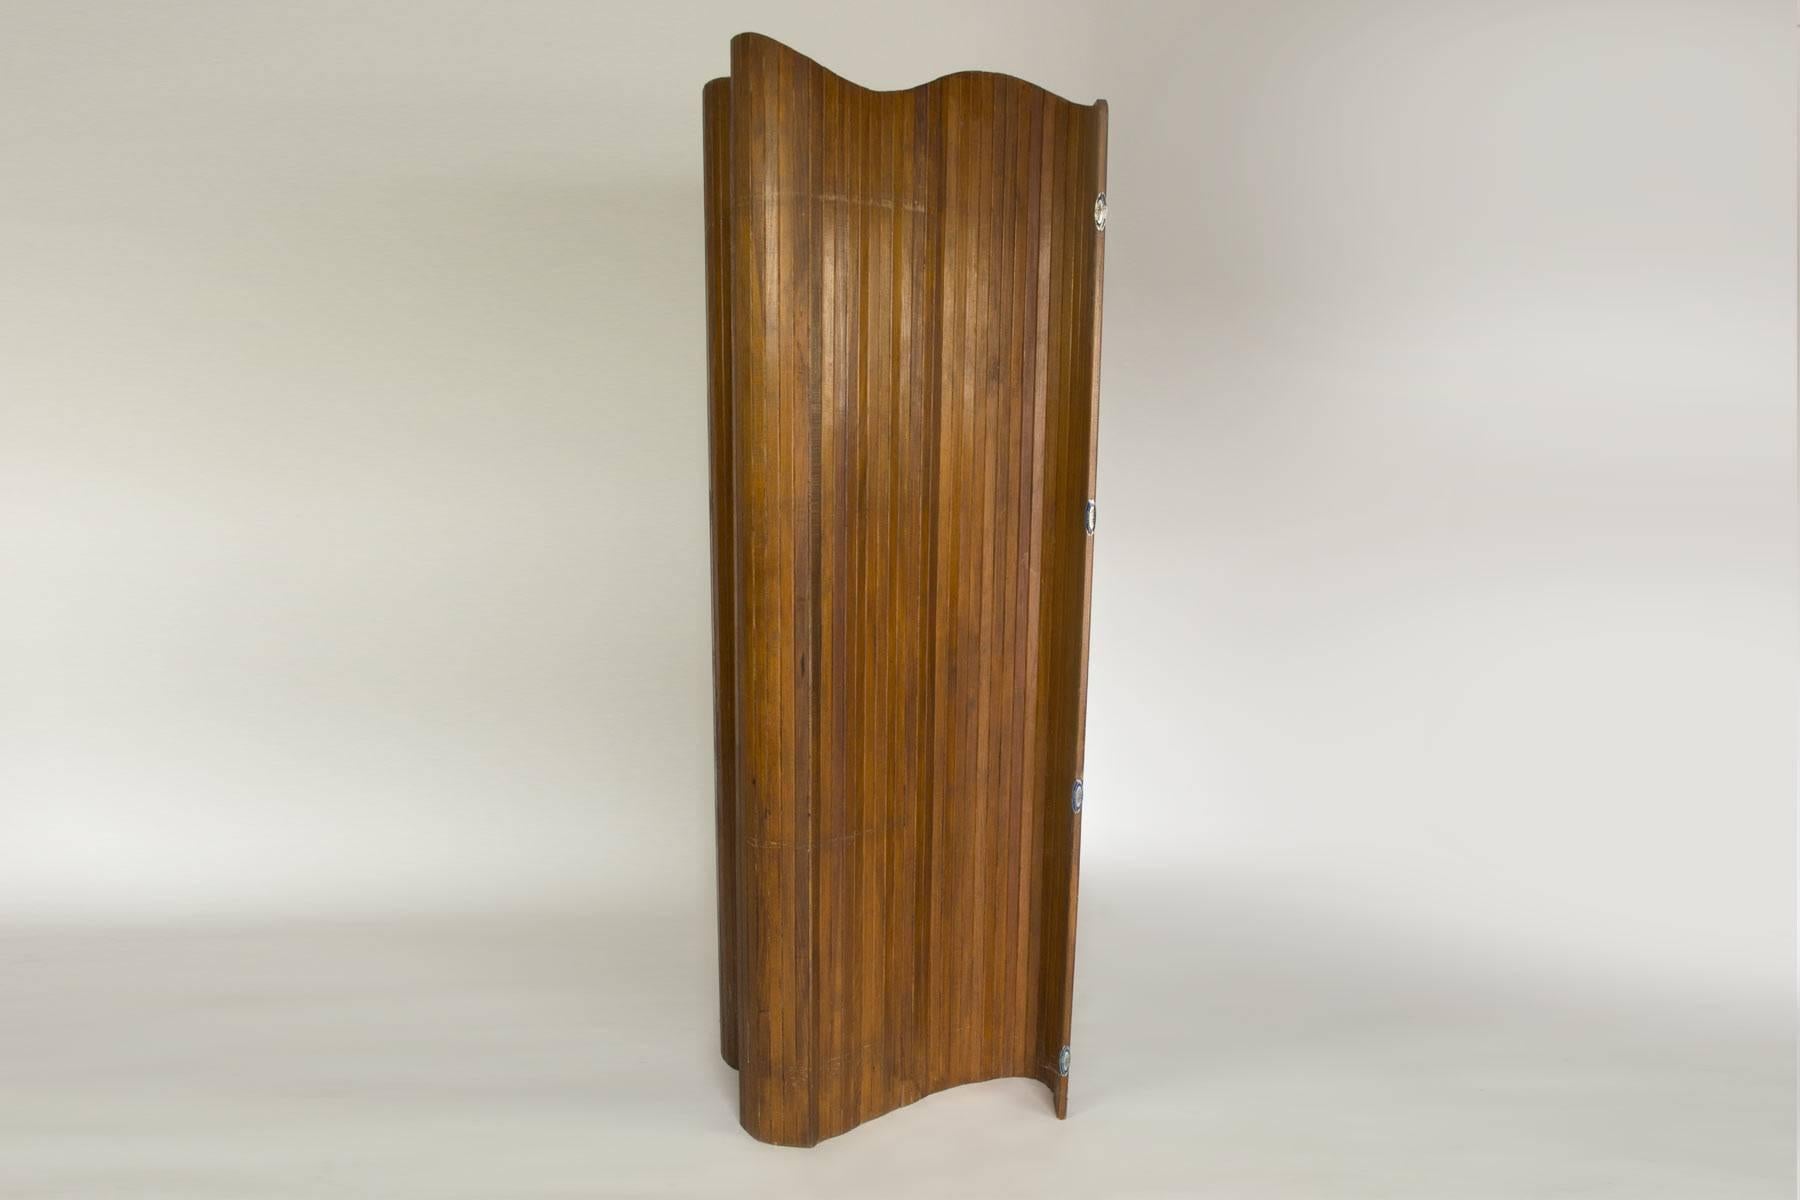 By Duremail, Toulouse, France, circa 1950. This screen made from rattan provides for an excellent room divider. It is light weight and the flexible design allows for great versatility. The warm wood tone blends well with all decor. This item in in